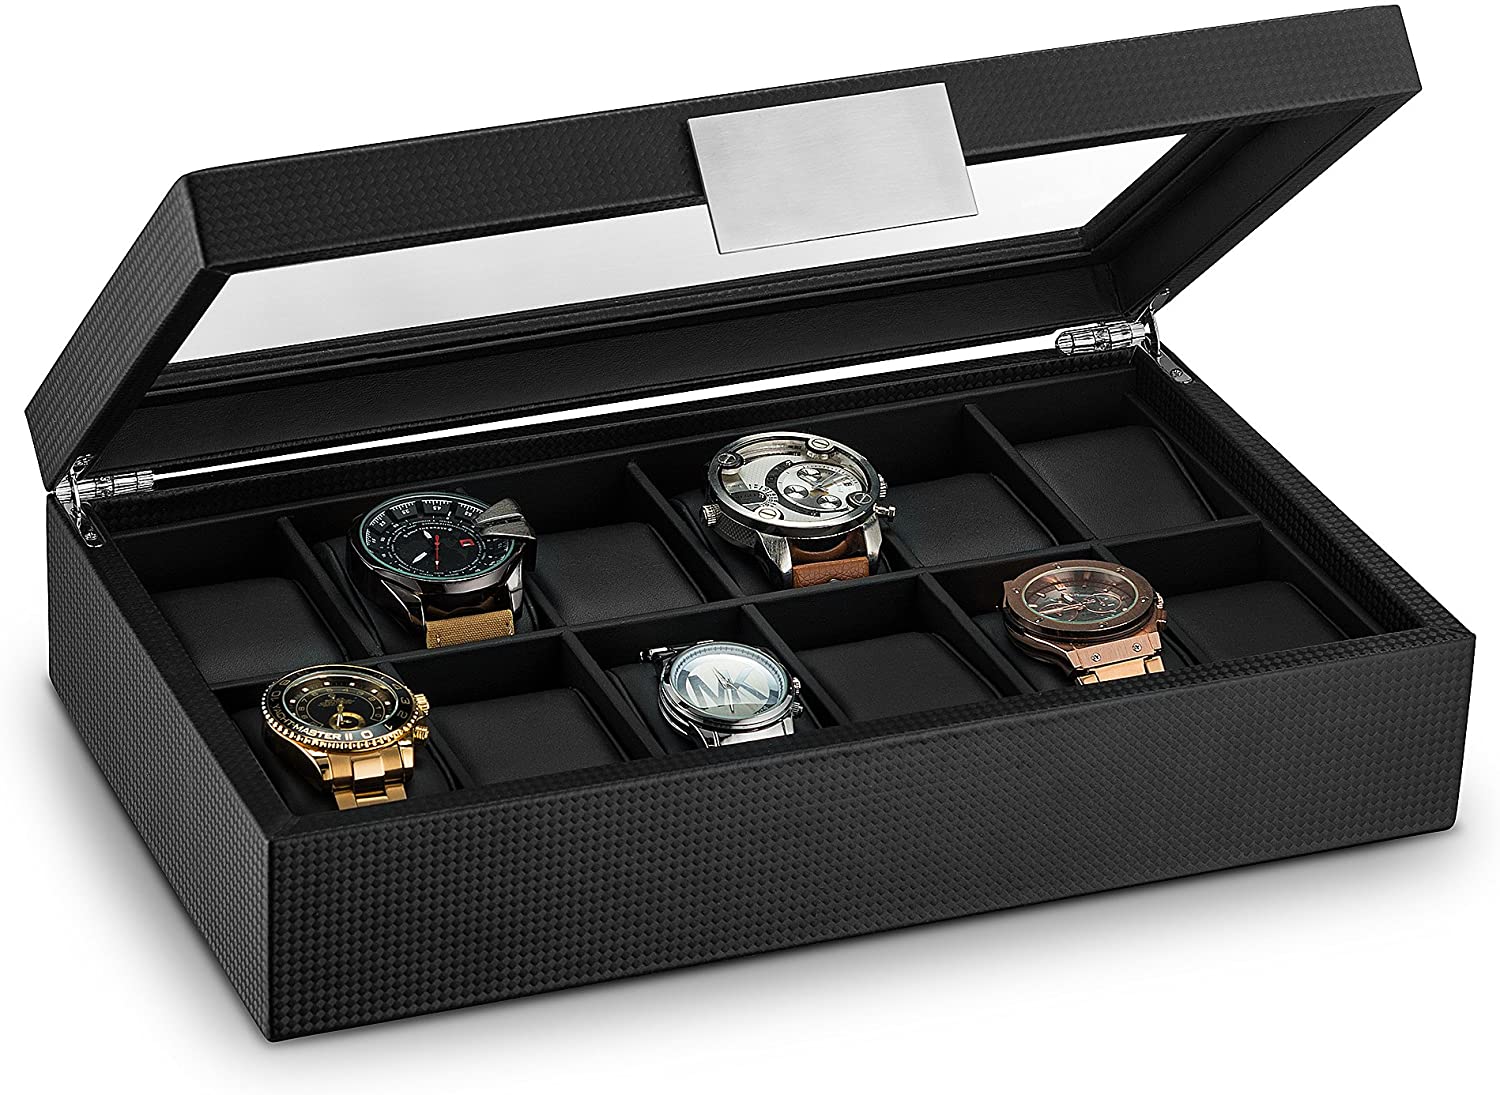 How to display your watch collection in style